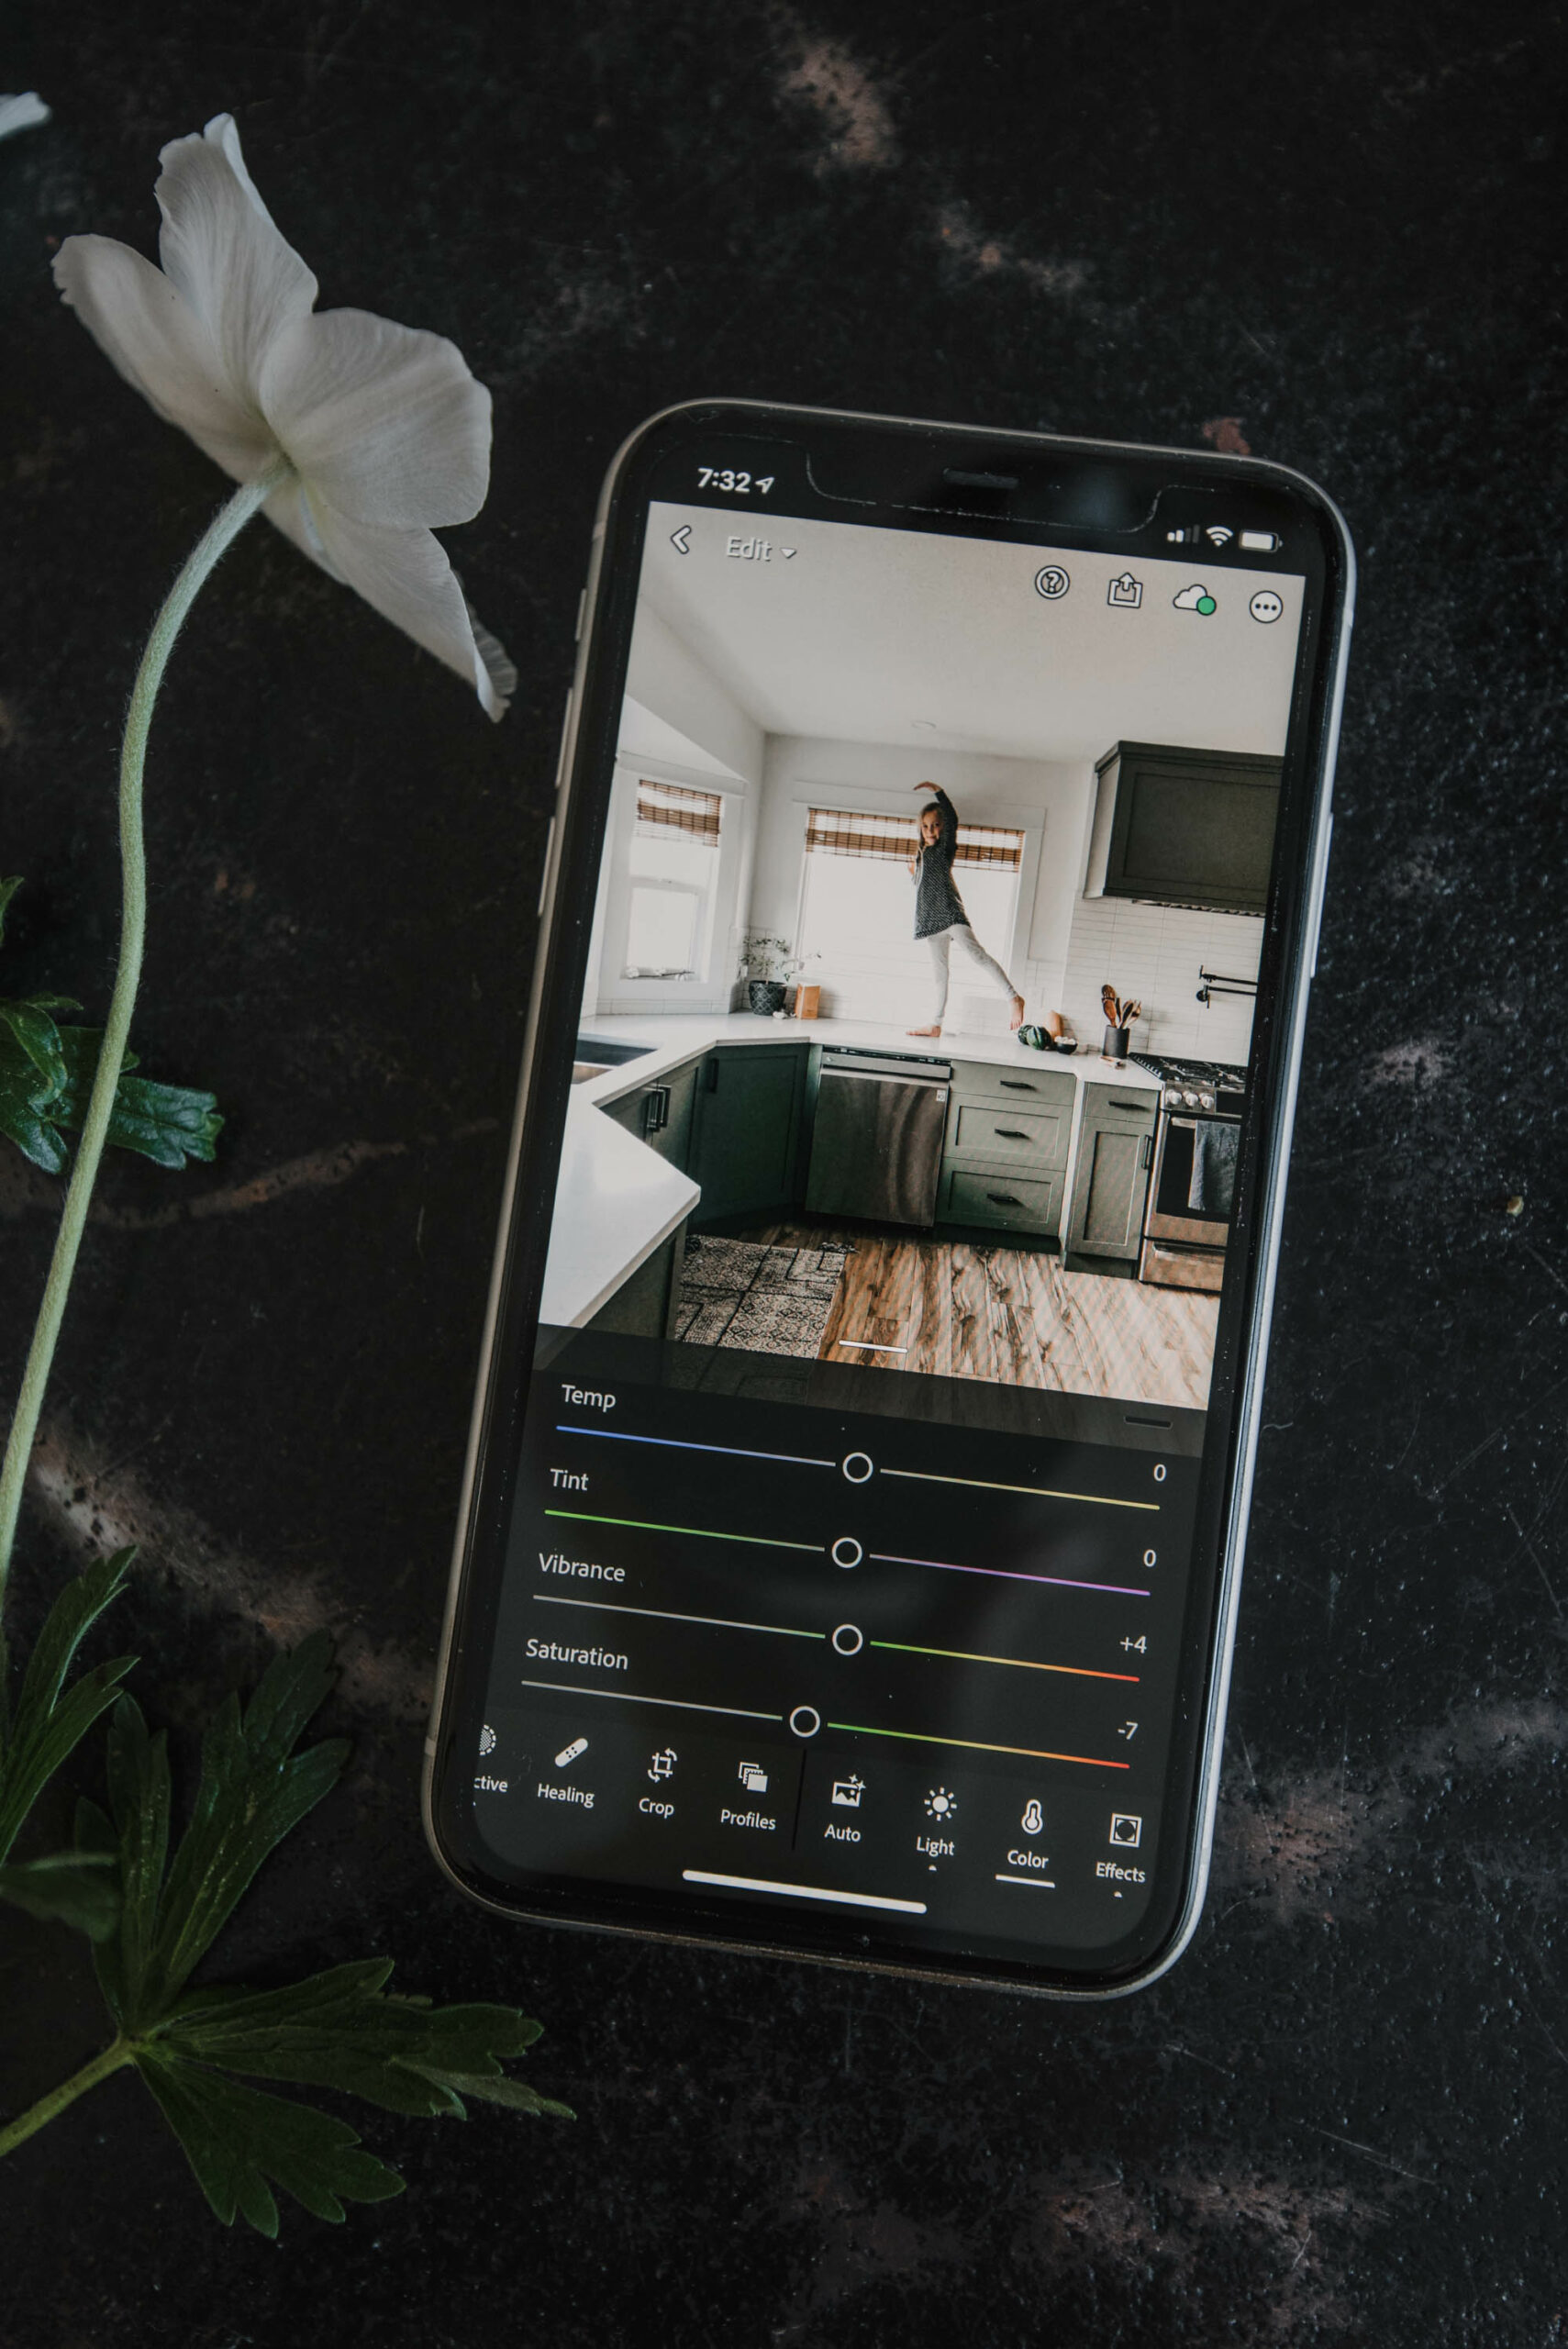 How to easily edit photos on your phone